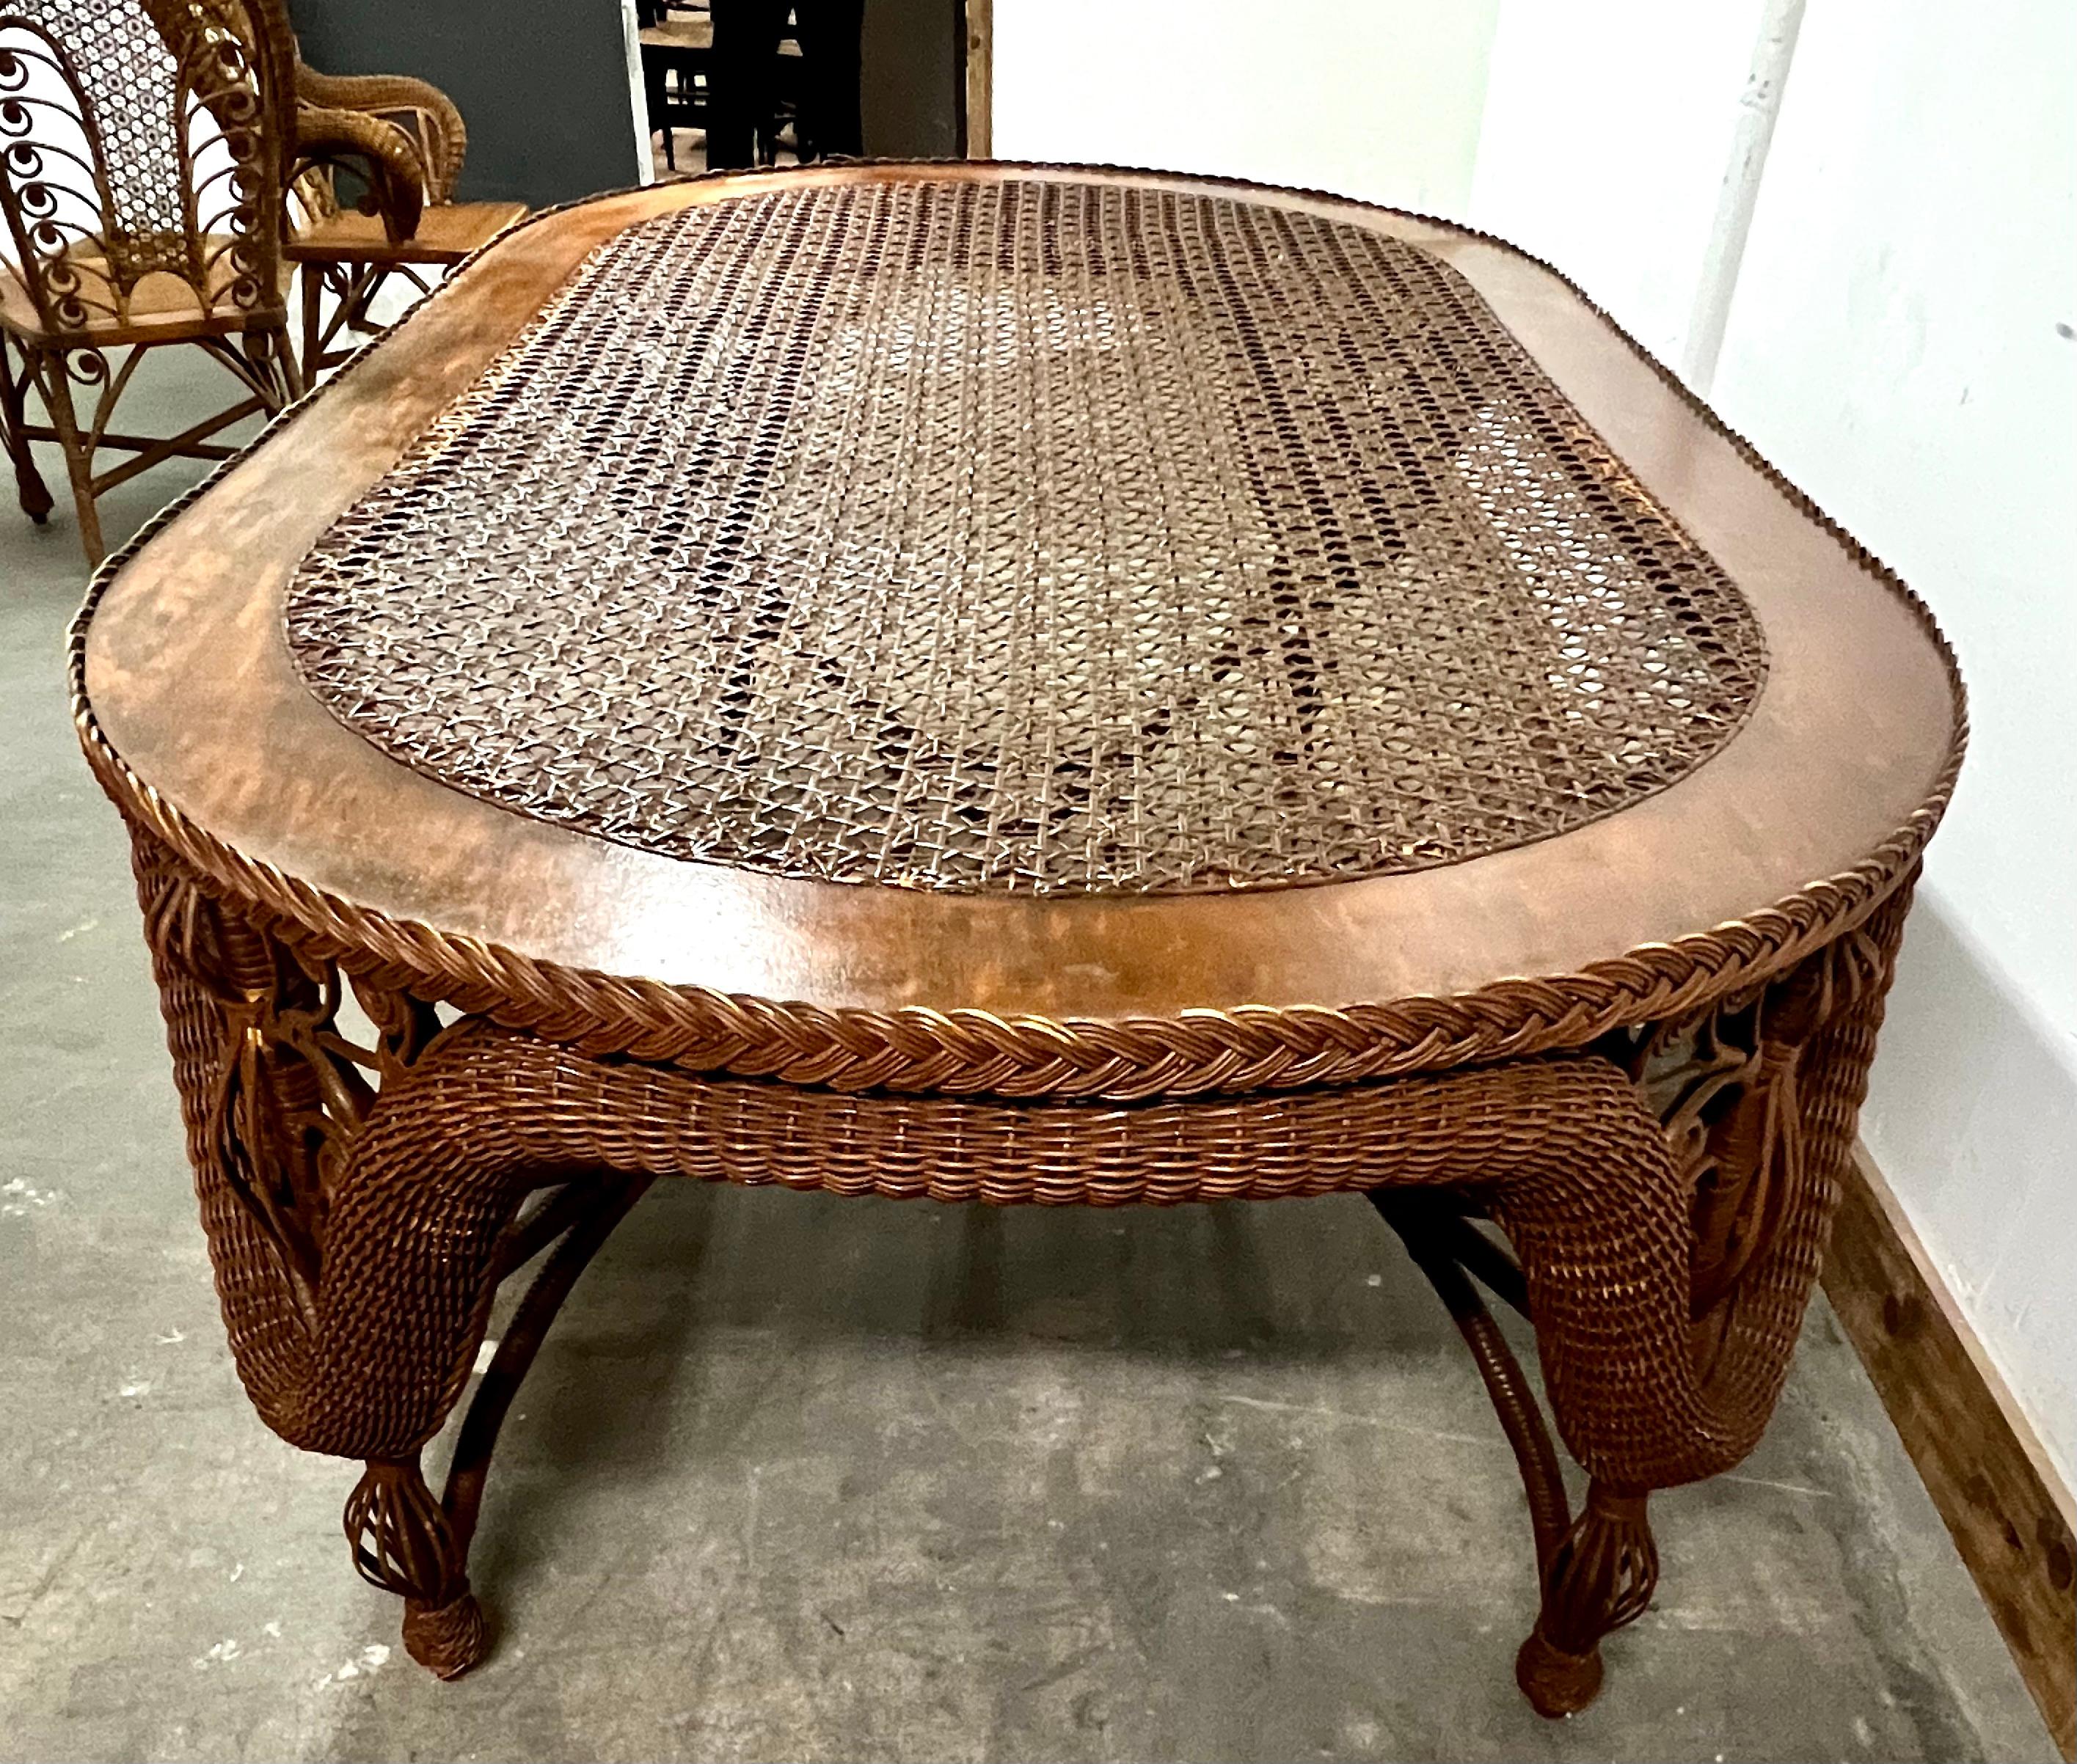 Wicker Dining Room Table with 6 Wicker Chairs For Sale 2